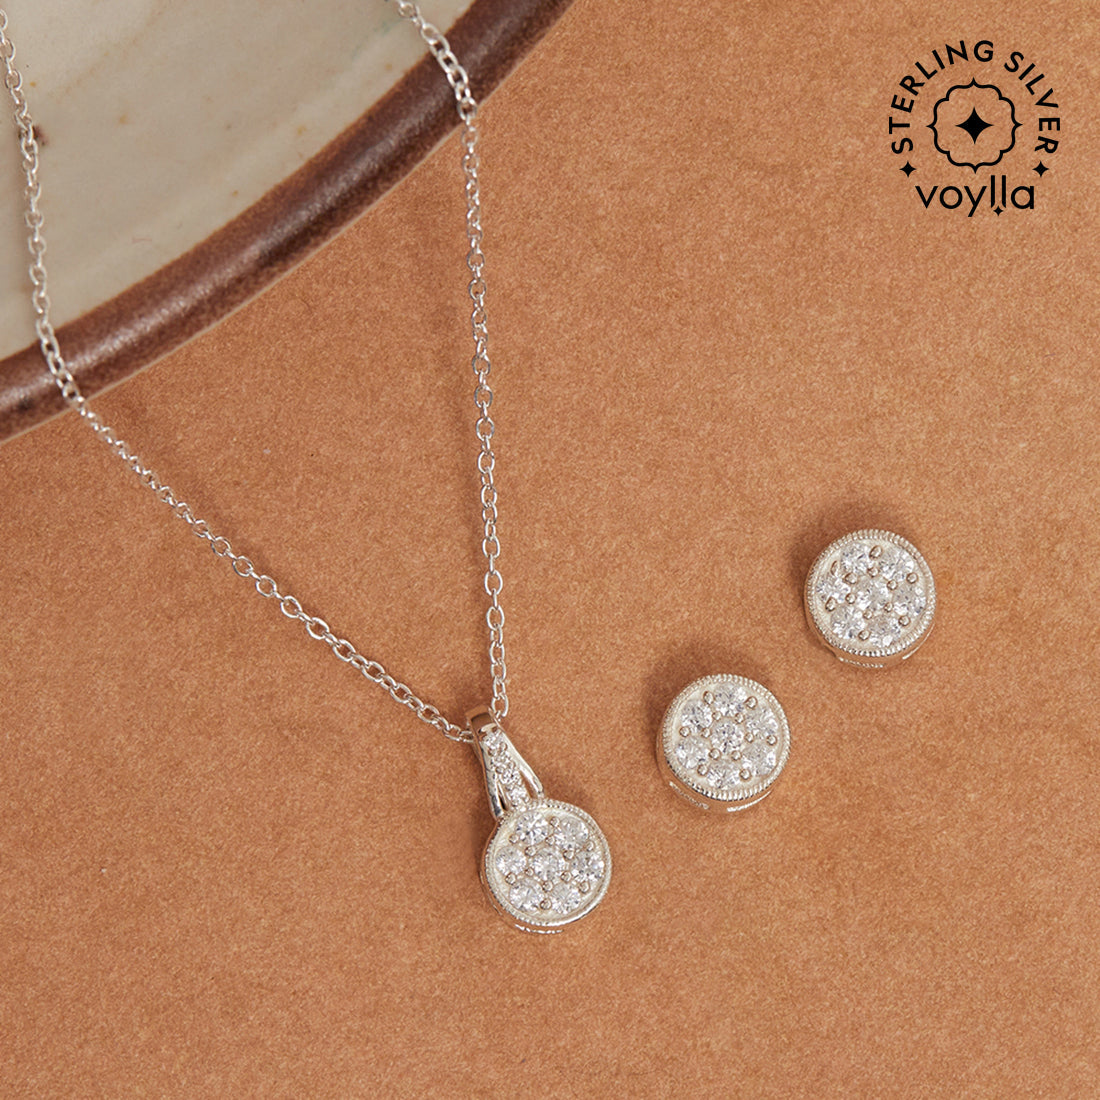 Women's Casual Round Cz Pendant Necklace And Earring 925 Sterling Silver Set - Voylla